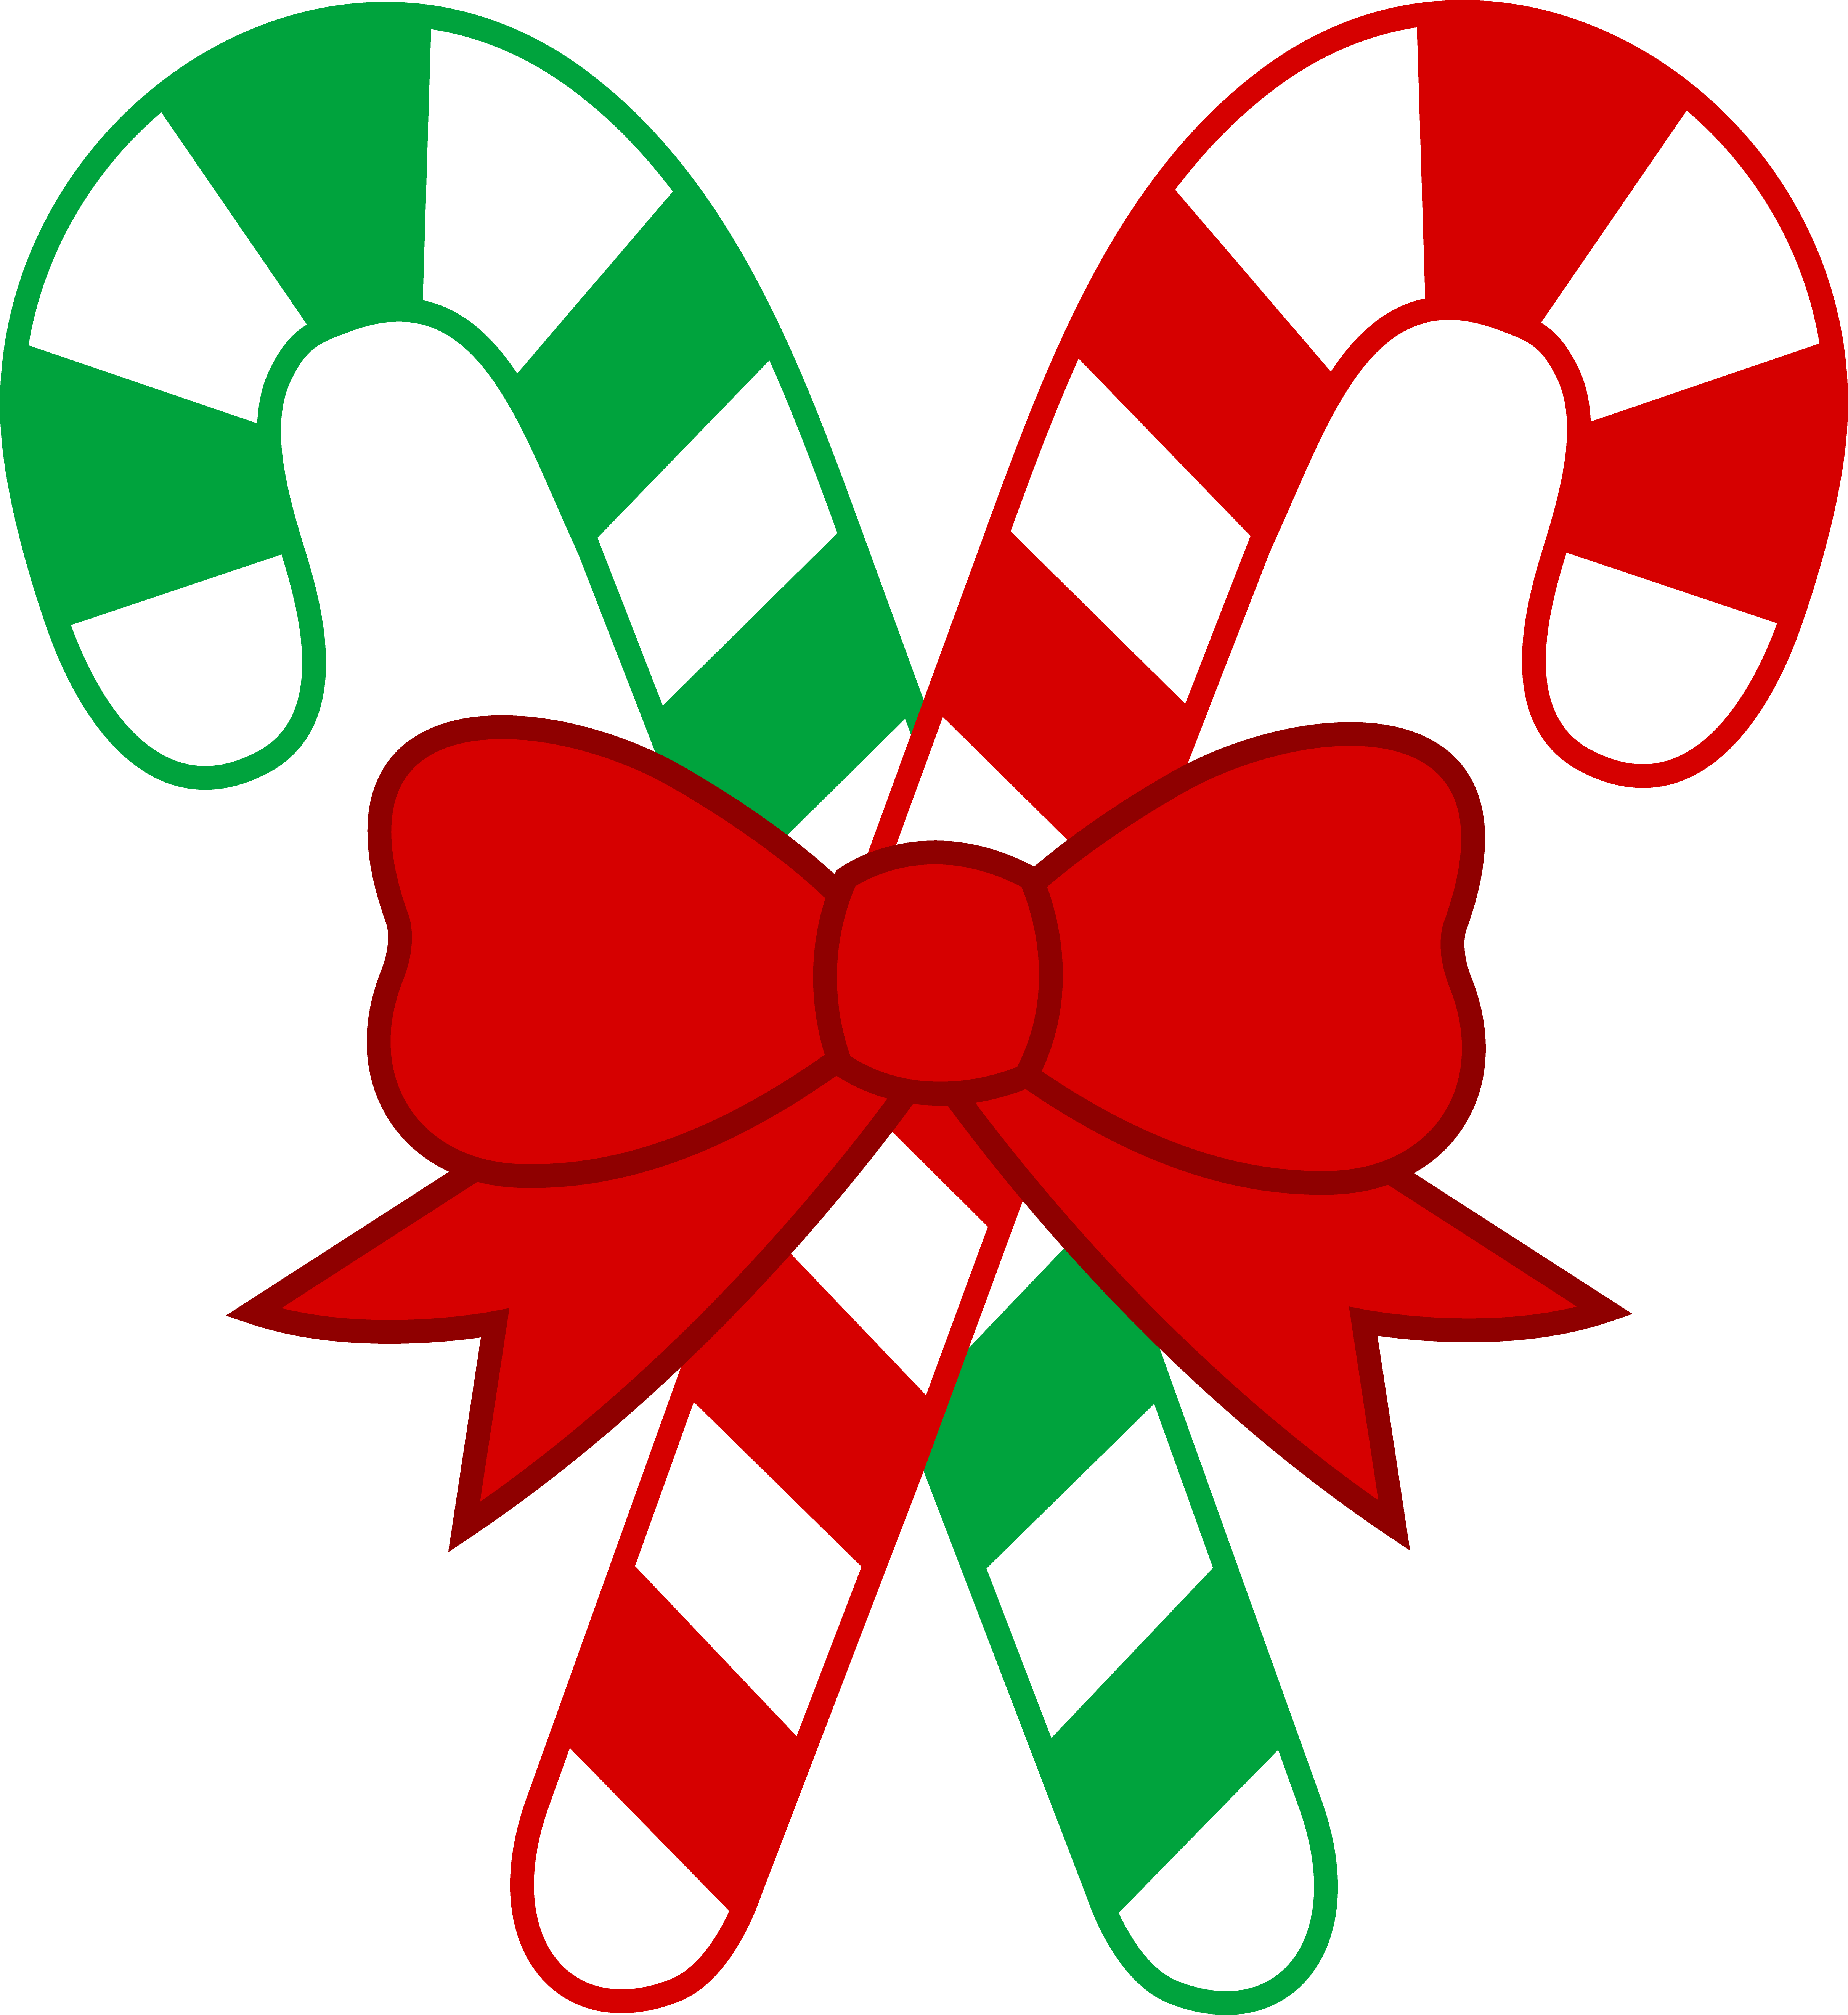 Candy canes clip art